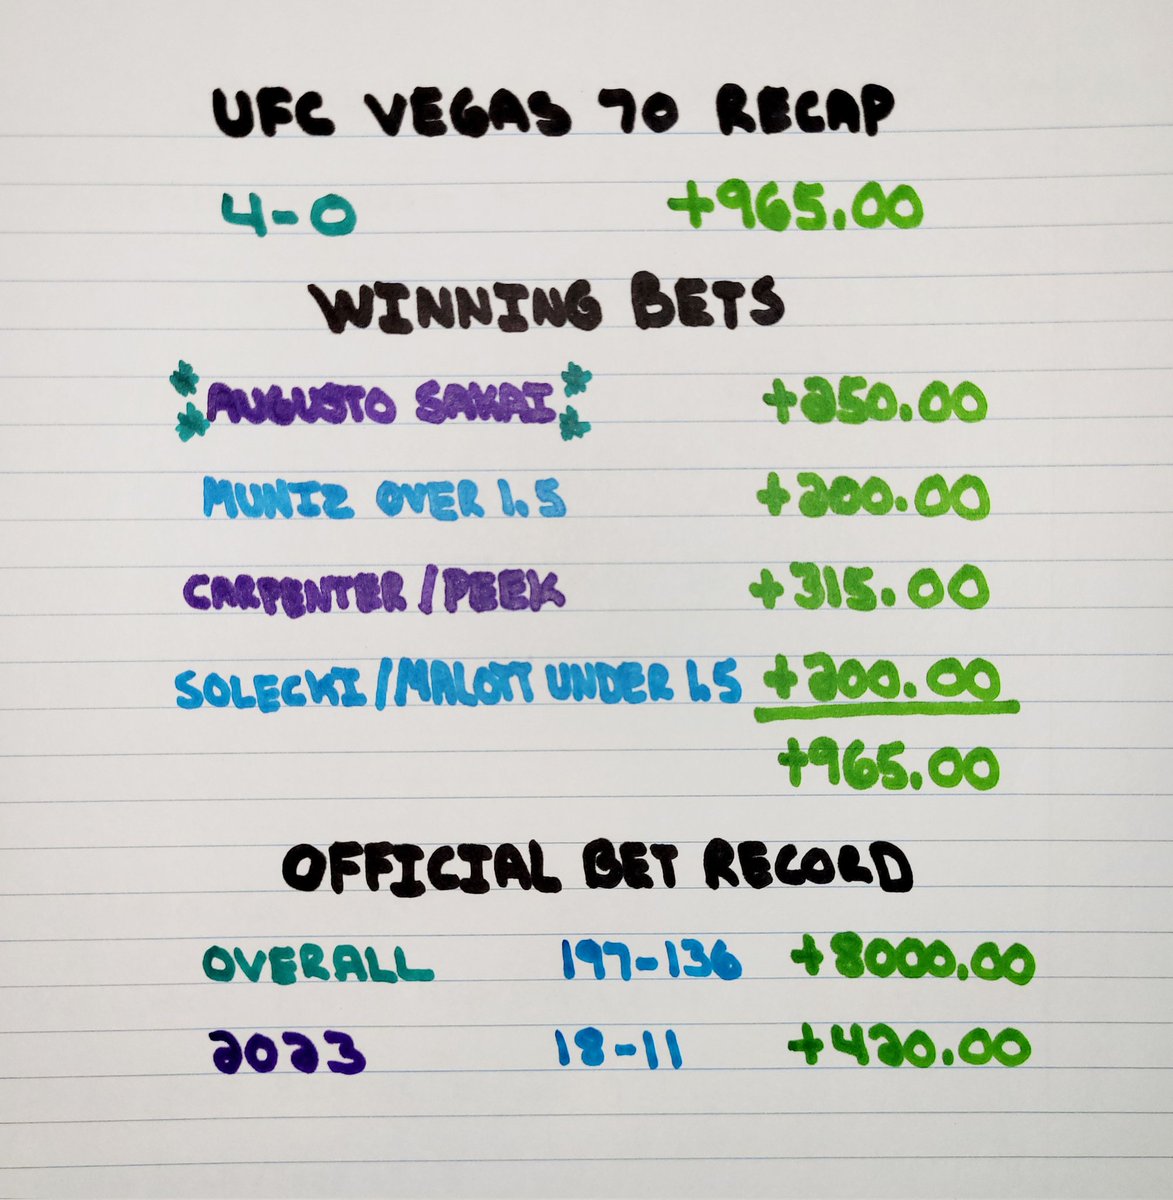 #UFCVegas70 recap. Took the bookies' front teeth👊. I beat over 200 in line movement for this card plus the sweep. My bets are free, but my patreon is open for my early bets and discord. MR. PPV will be dropping #UFC285 breakdown tonight on YouTube. #MMATwitter #gamblingtwitter